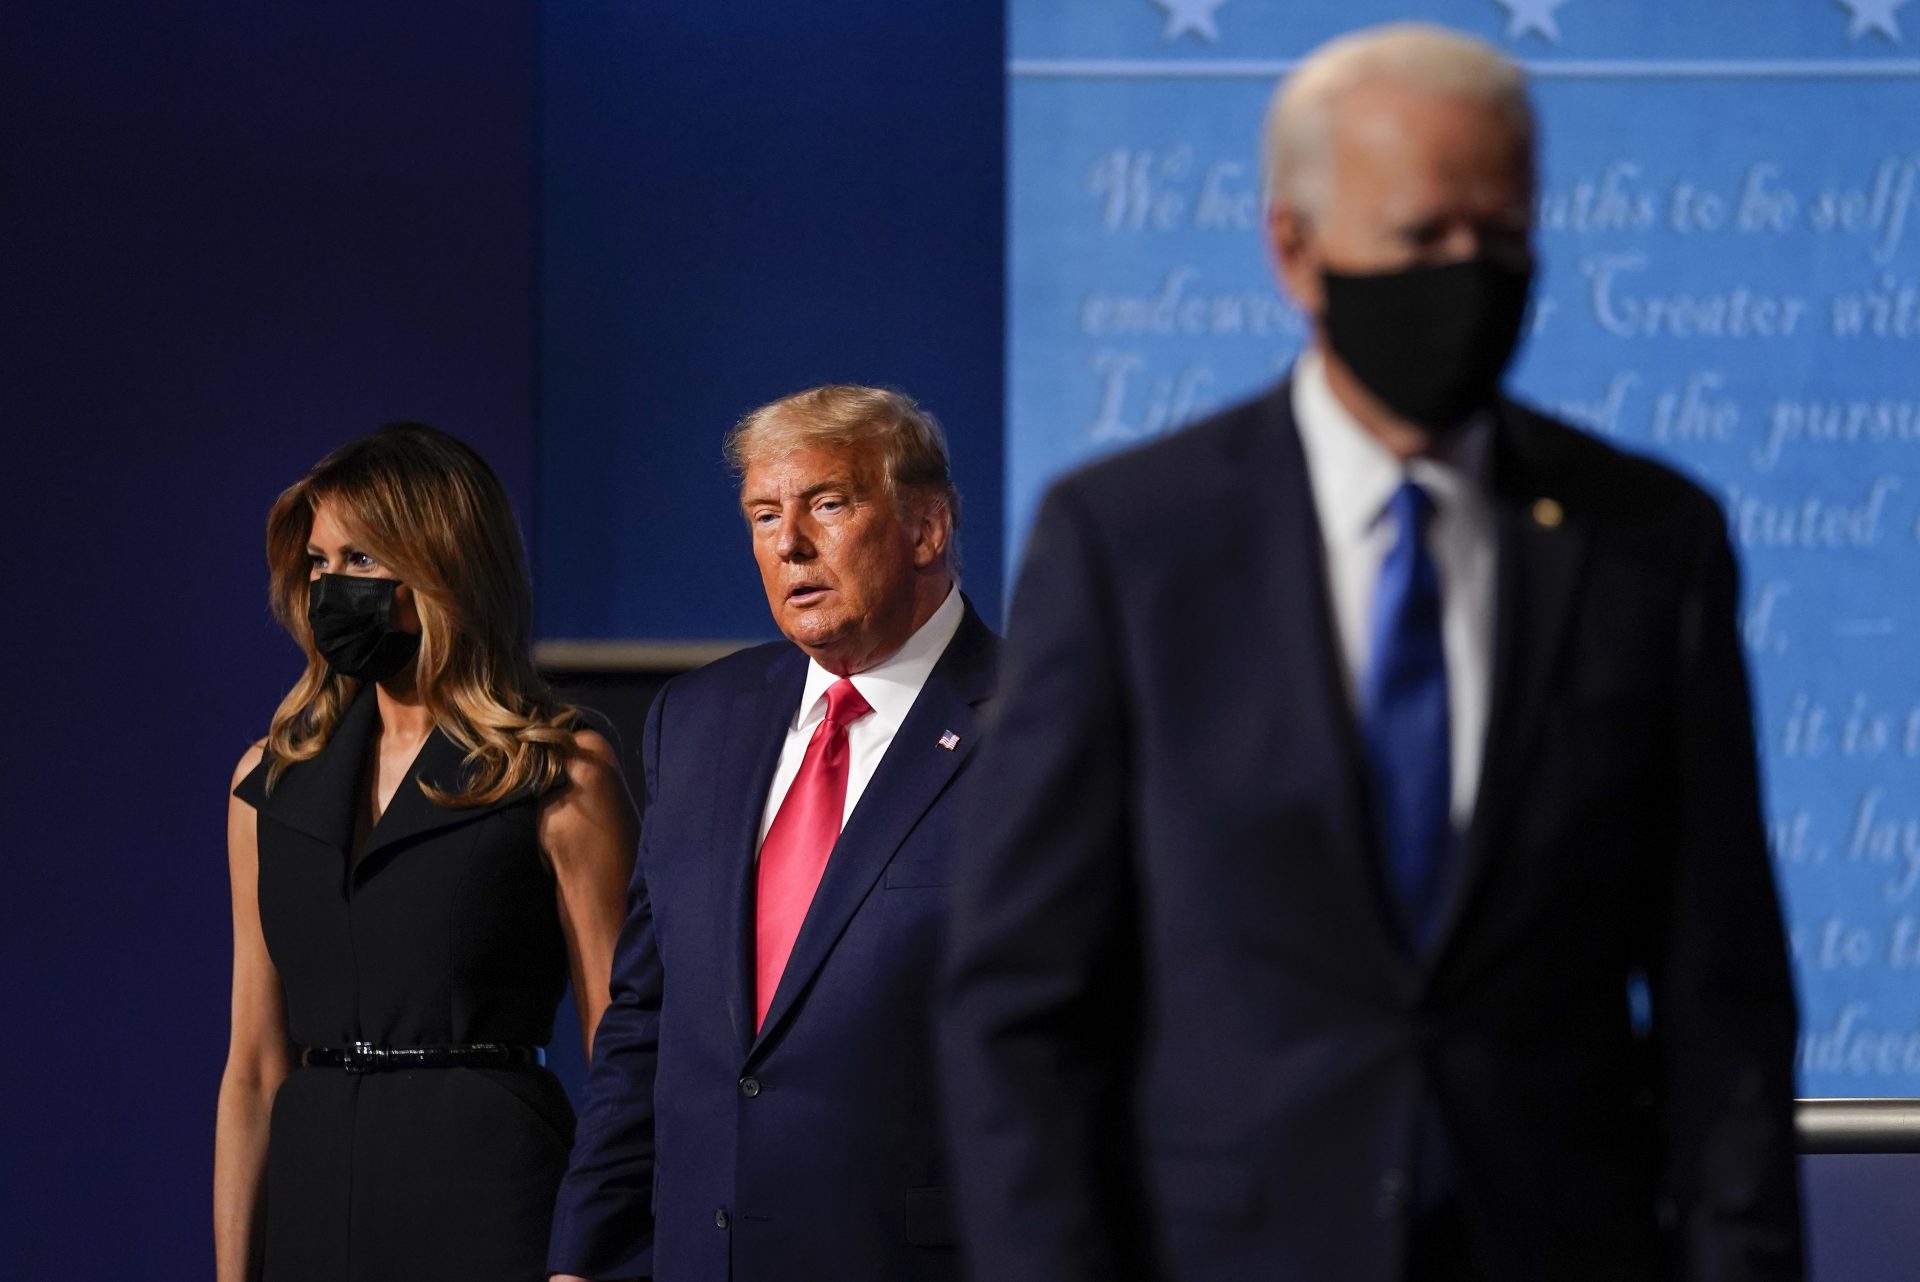 First lady Melania Trump, left, and President Donald Trump, center, remain on stage as Democratic presidential candidate former Vice President Joe Biden, right, walk away at the conclusion of the second and final presidential debate Thursday, Oct. 22, 2020, at Belmont University in Nashville, Tenn.